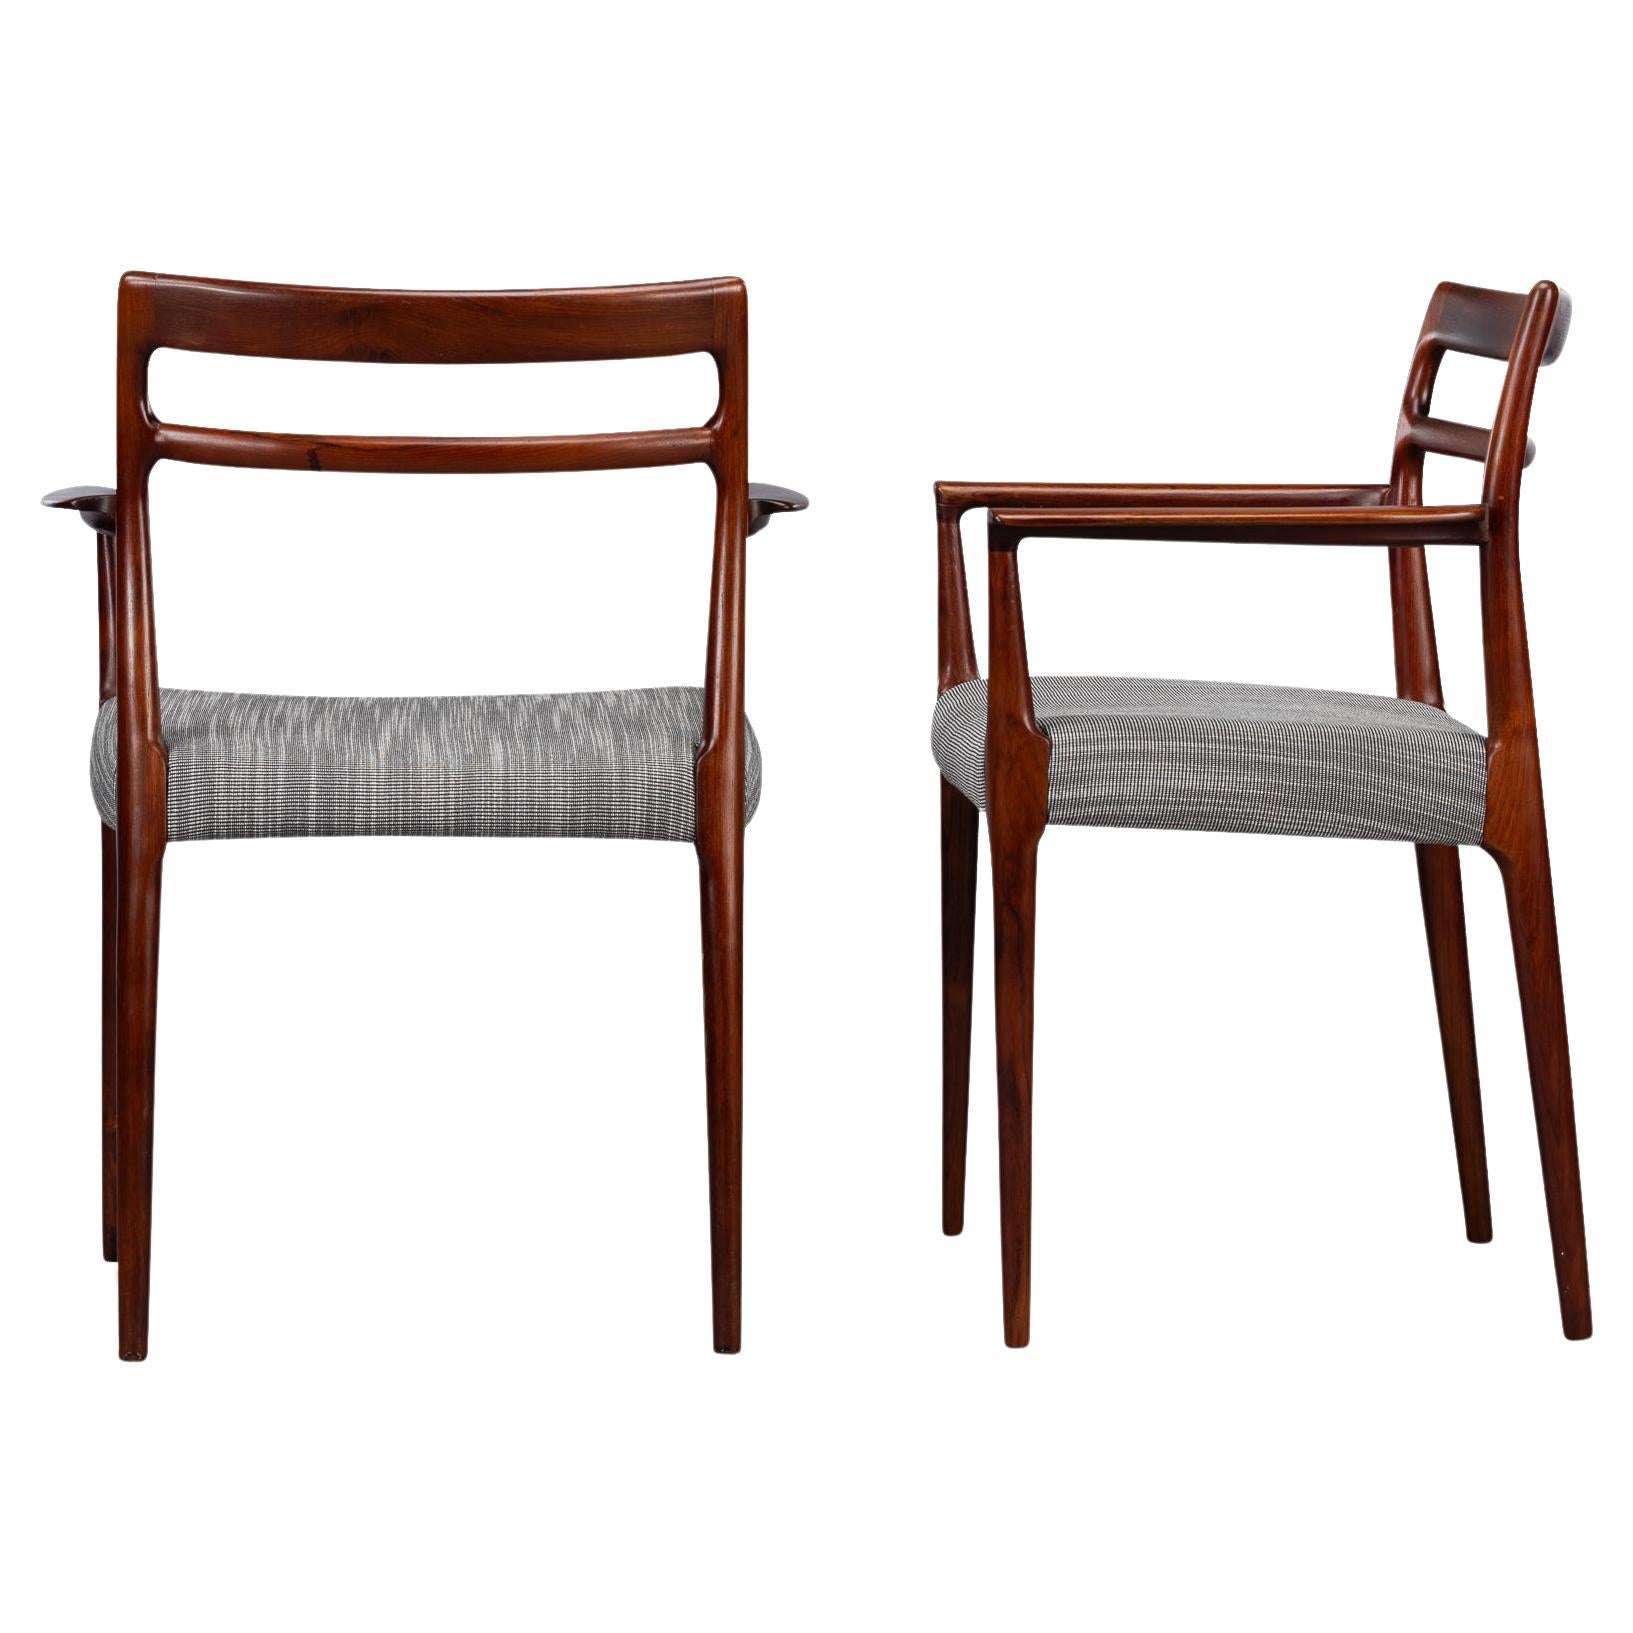 Dining chair by Erling torvits
A set of two armchairs made by Erling Torvits for Soro Stolefabrik in beautiful rosewood. All chairs are marked with the Soro Stolefabrik stamp on the underside of the seat. We have had these beautiful chairs